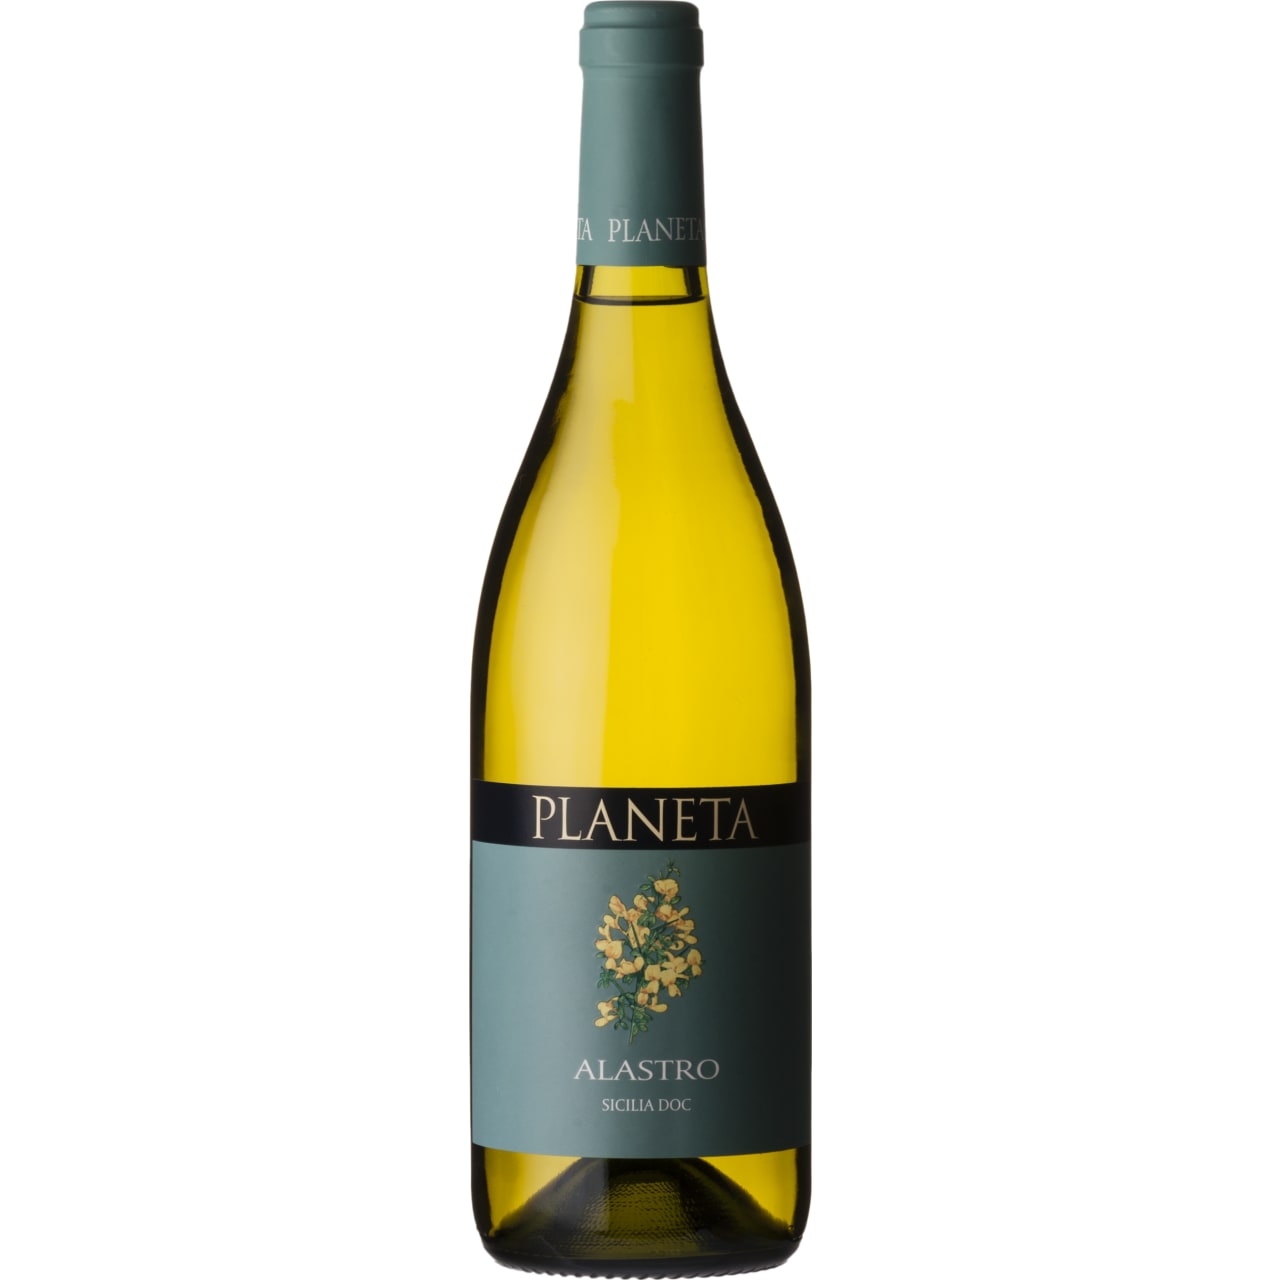 A blend of Grillo and Sauvignon Blanc. Peachy nose, with hints of vanilla, jasmine and green tea.